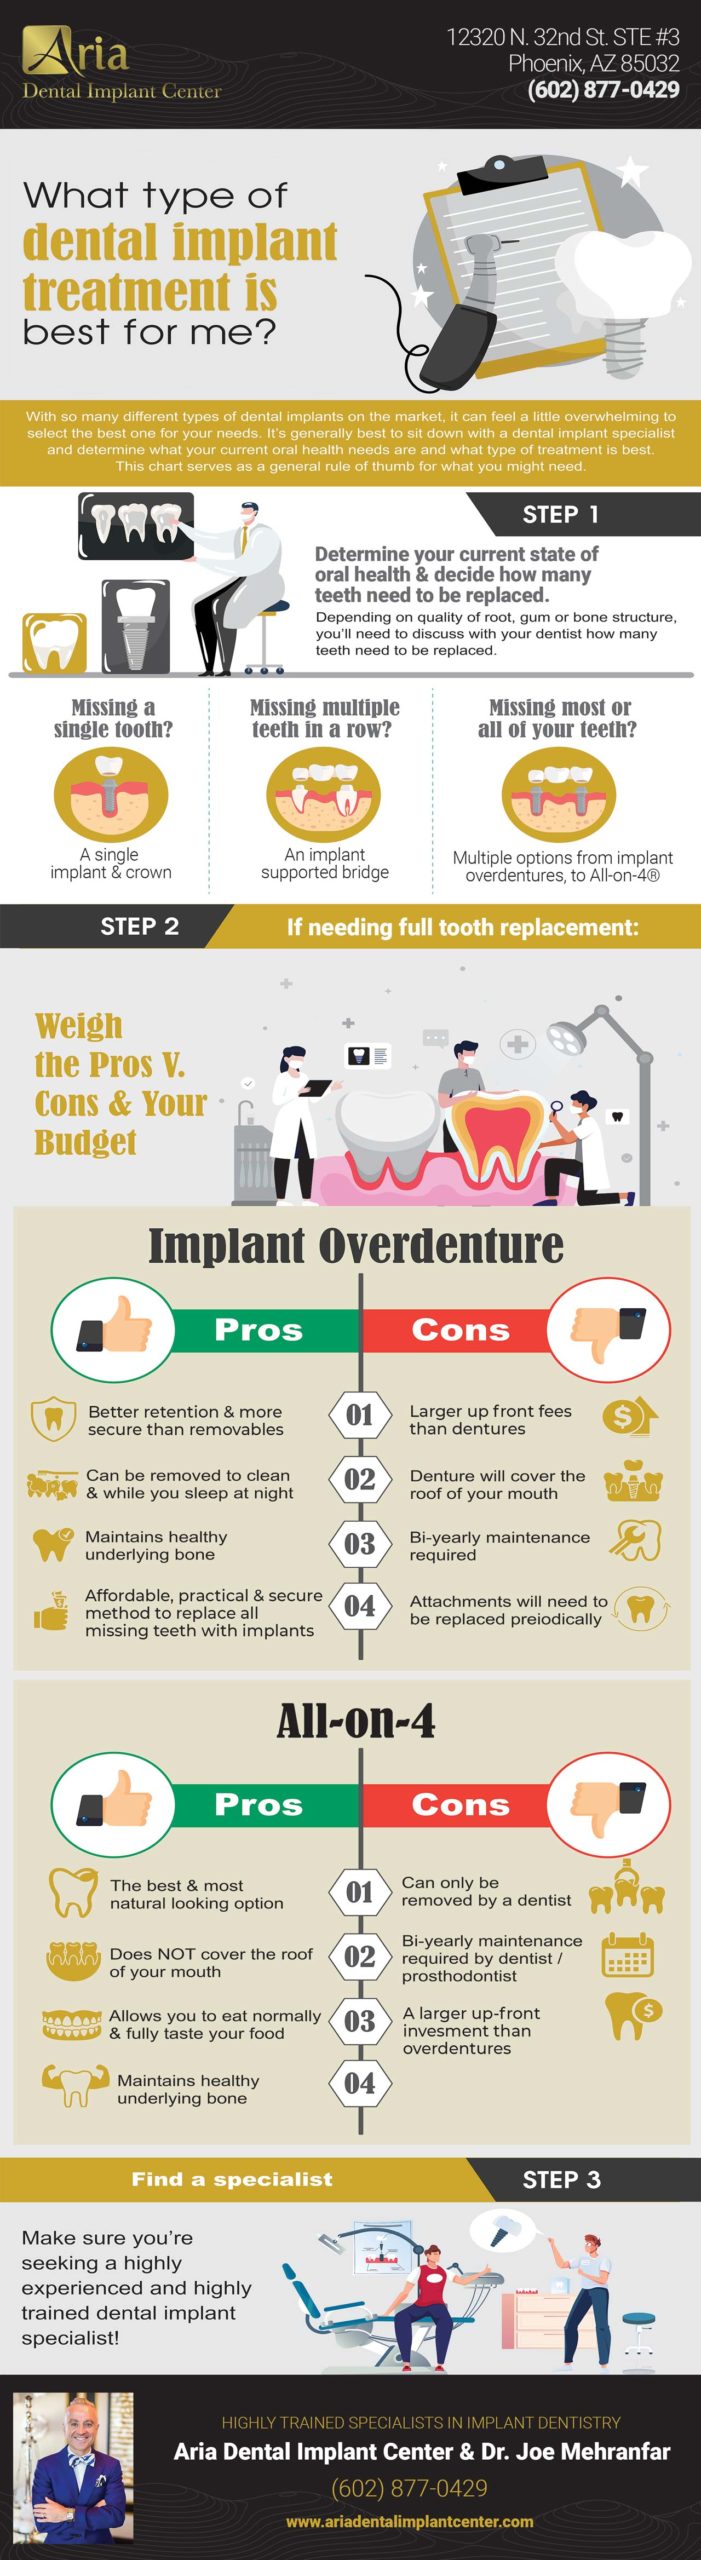 What Type of Dental Implants Treatment is Best for Me - Pros vs. Cons of Each - Infographic